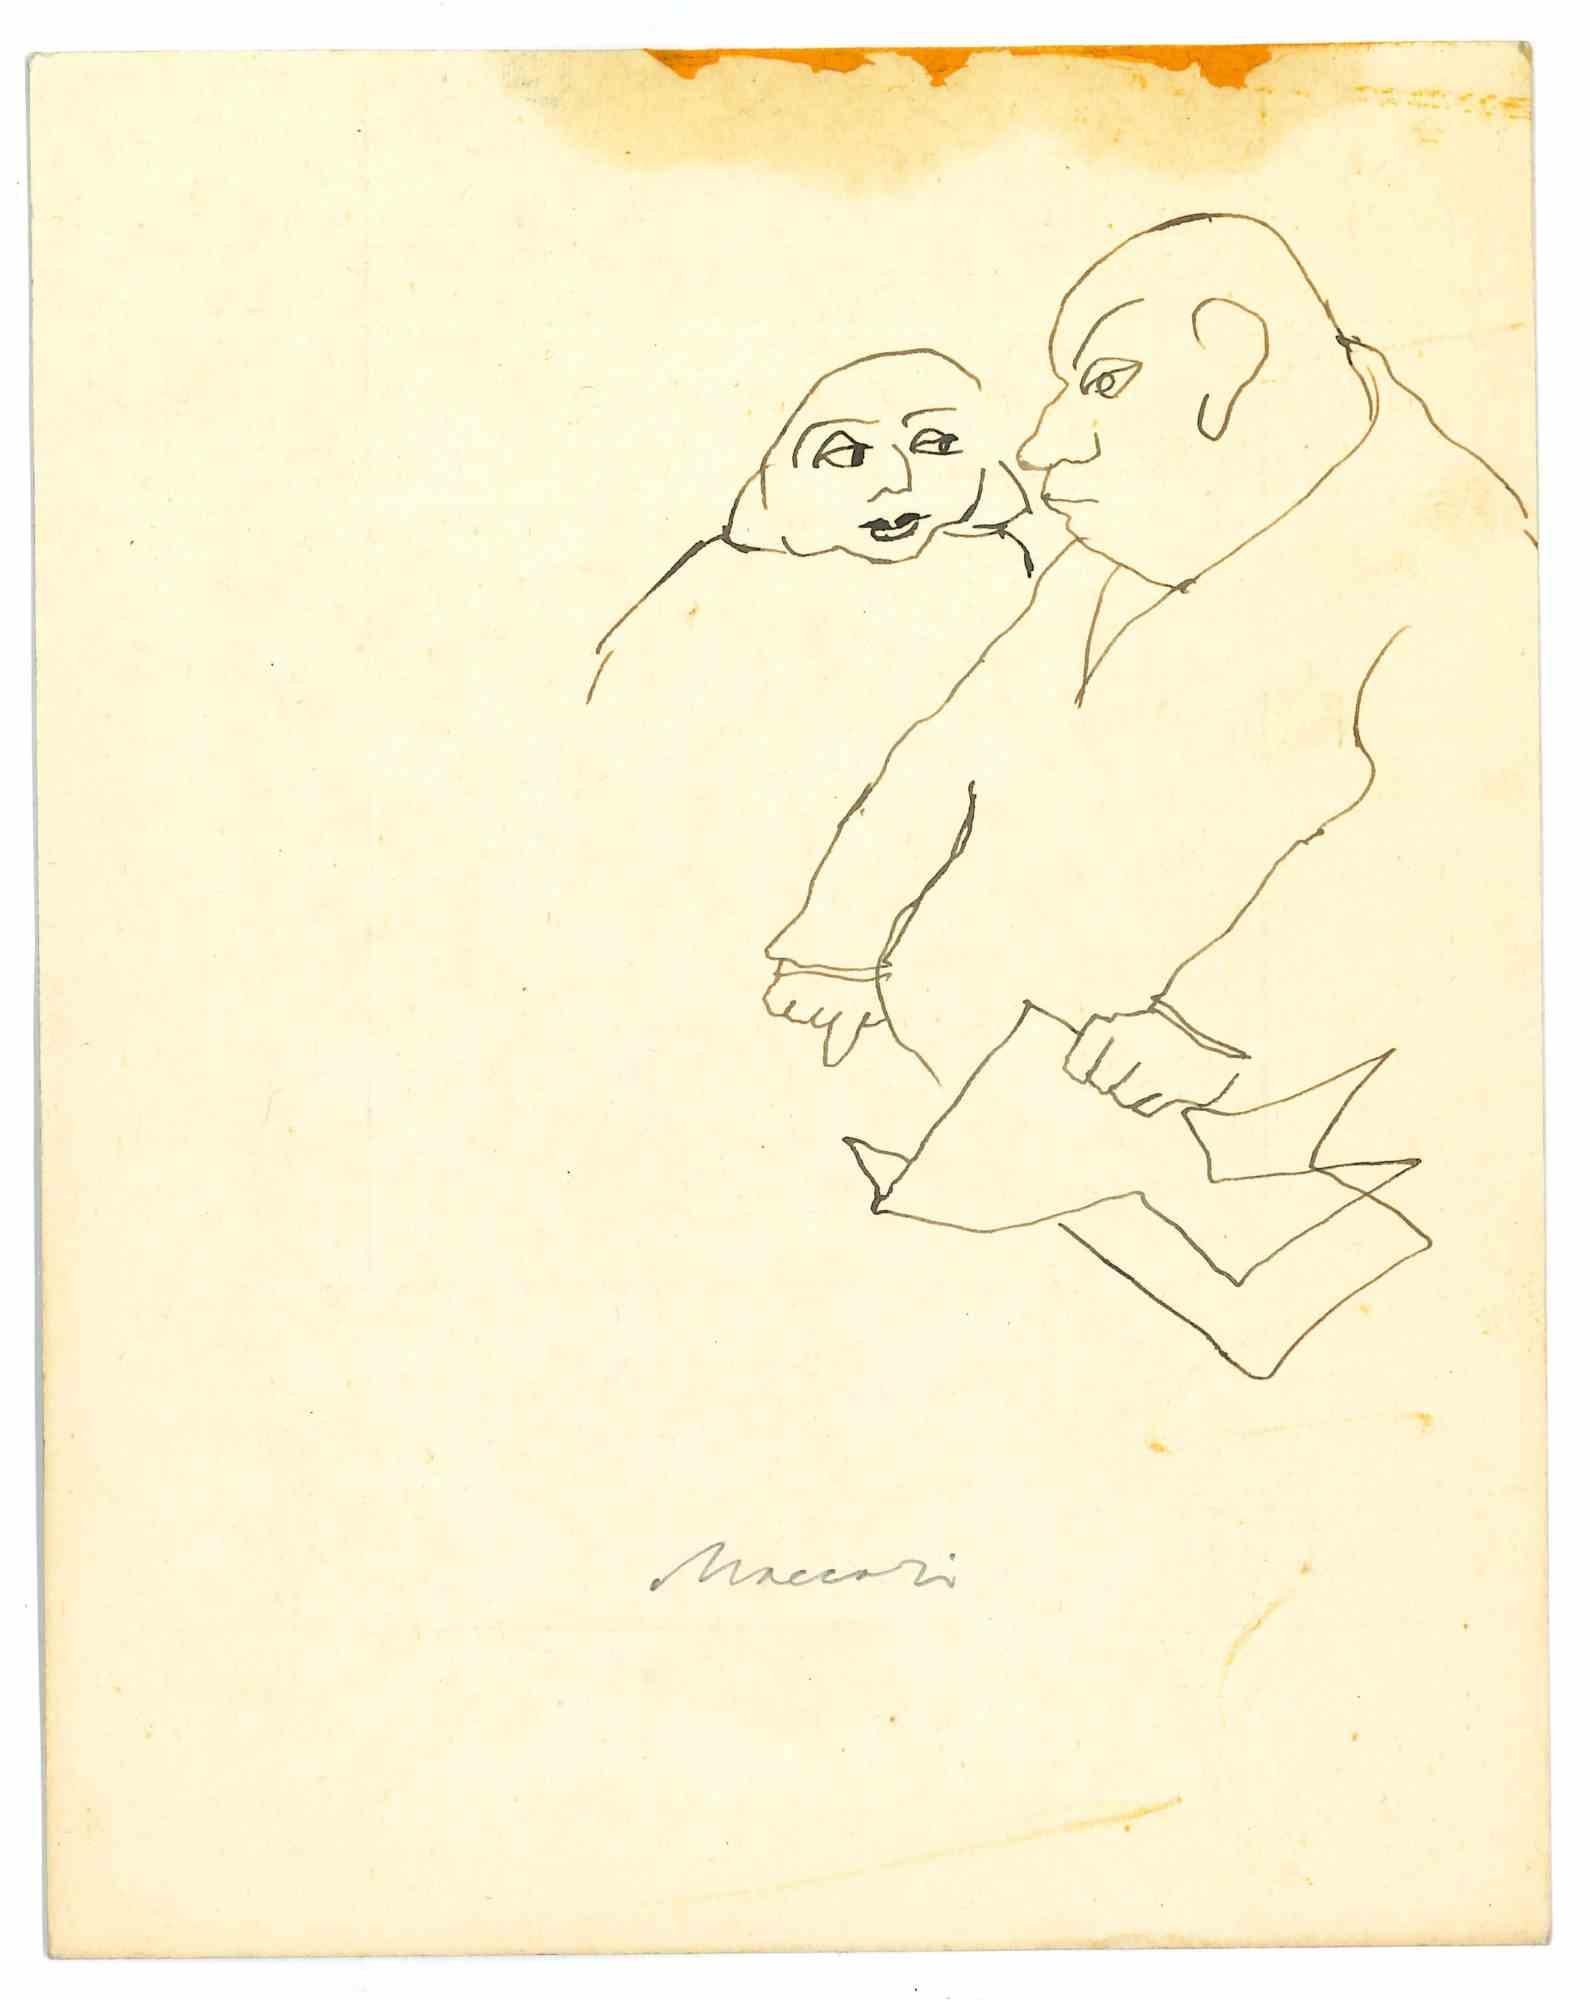 Conversation is a china ink drawing realized by Mino Maccari  (1924-1989) in the Mid-20th Century.

Hand-signed.

Good conditions with slight foxing.

Mino Maccari (Siena, 1924-Rome, June 16, 1989) was an Italian writer, painter, engraver and